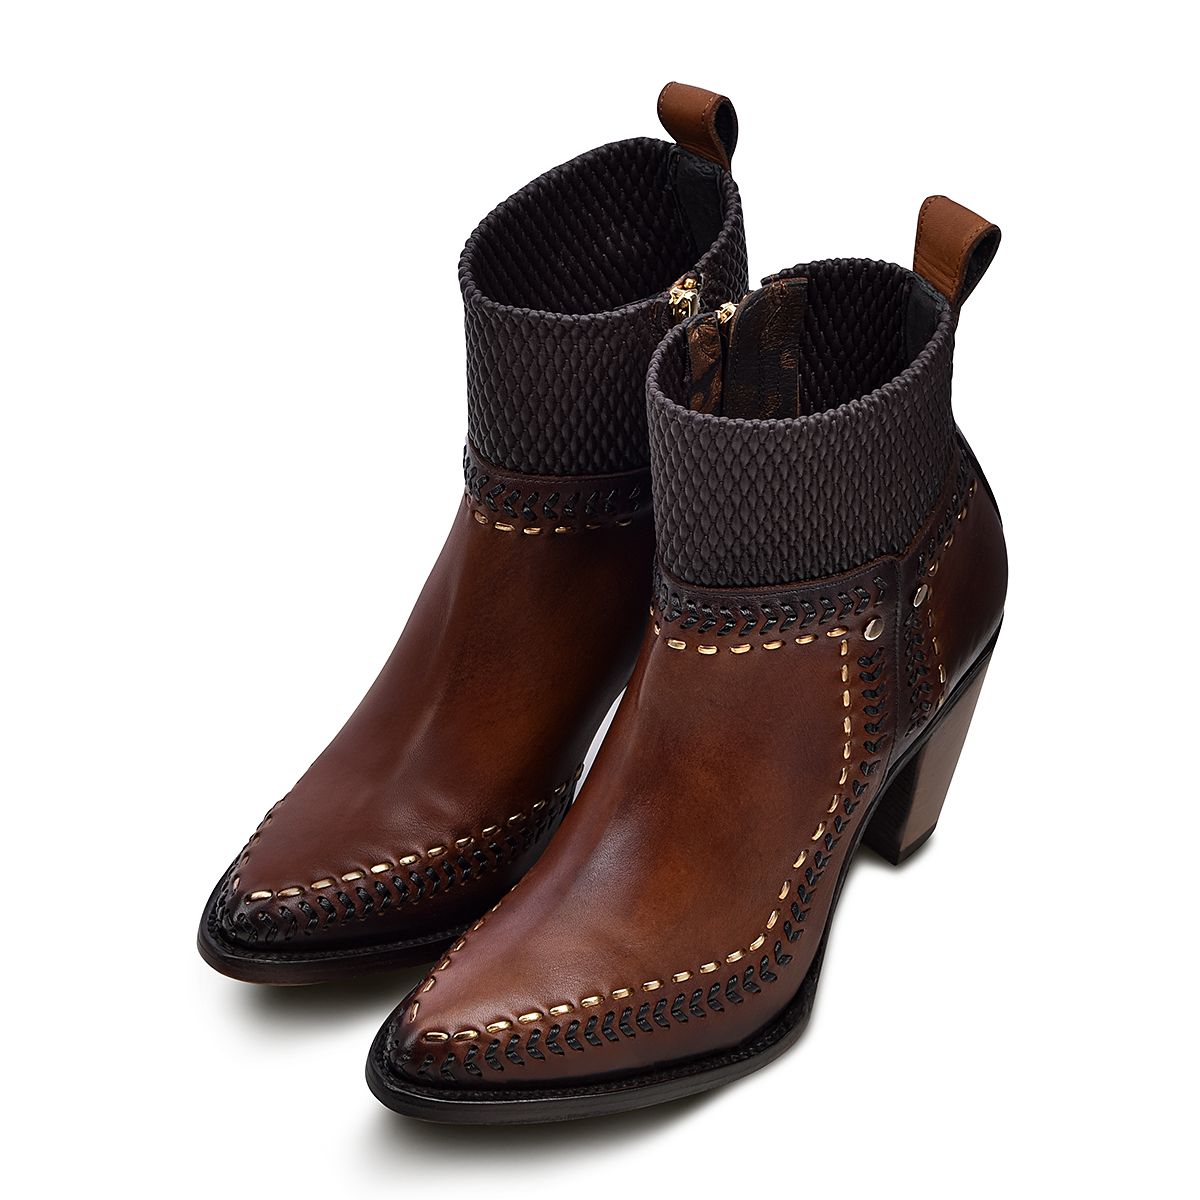 3F81RS - Cuadra brown western cowgirl cowhide leather ankle boots for women-Kuet.us